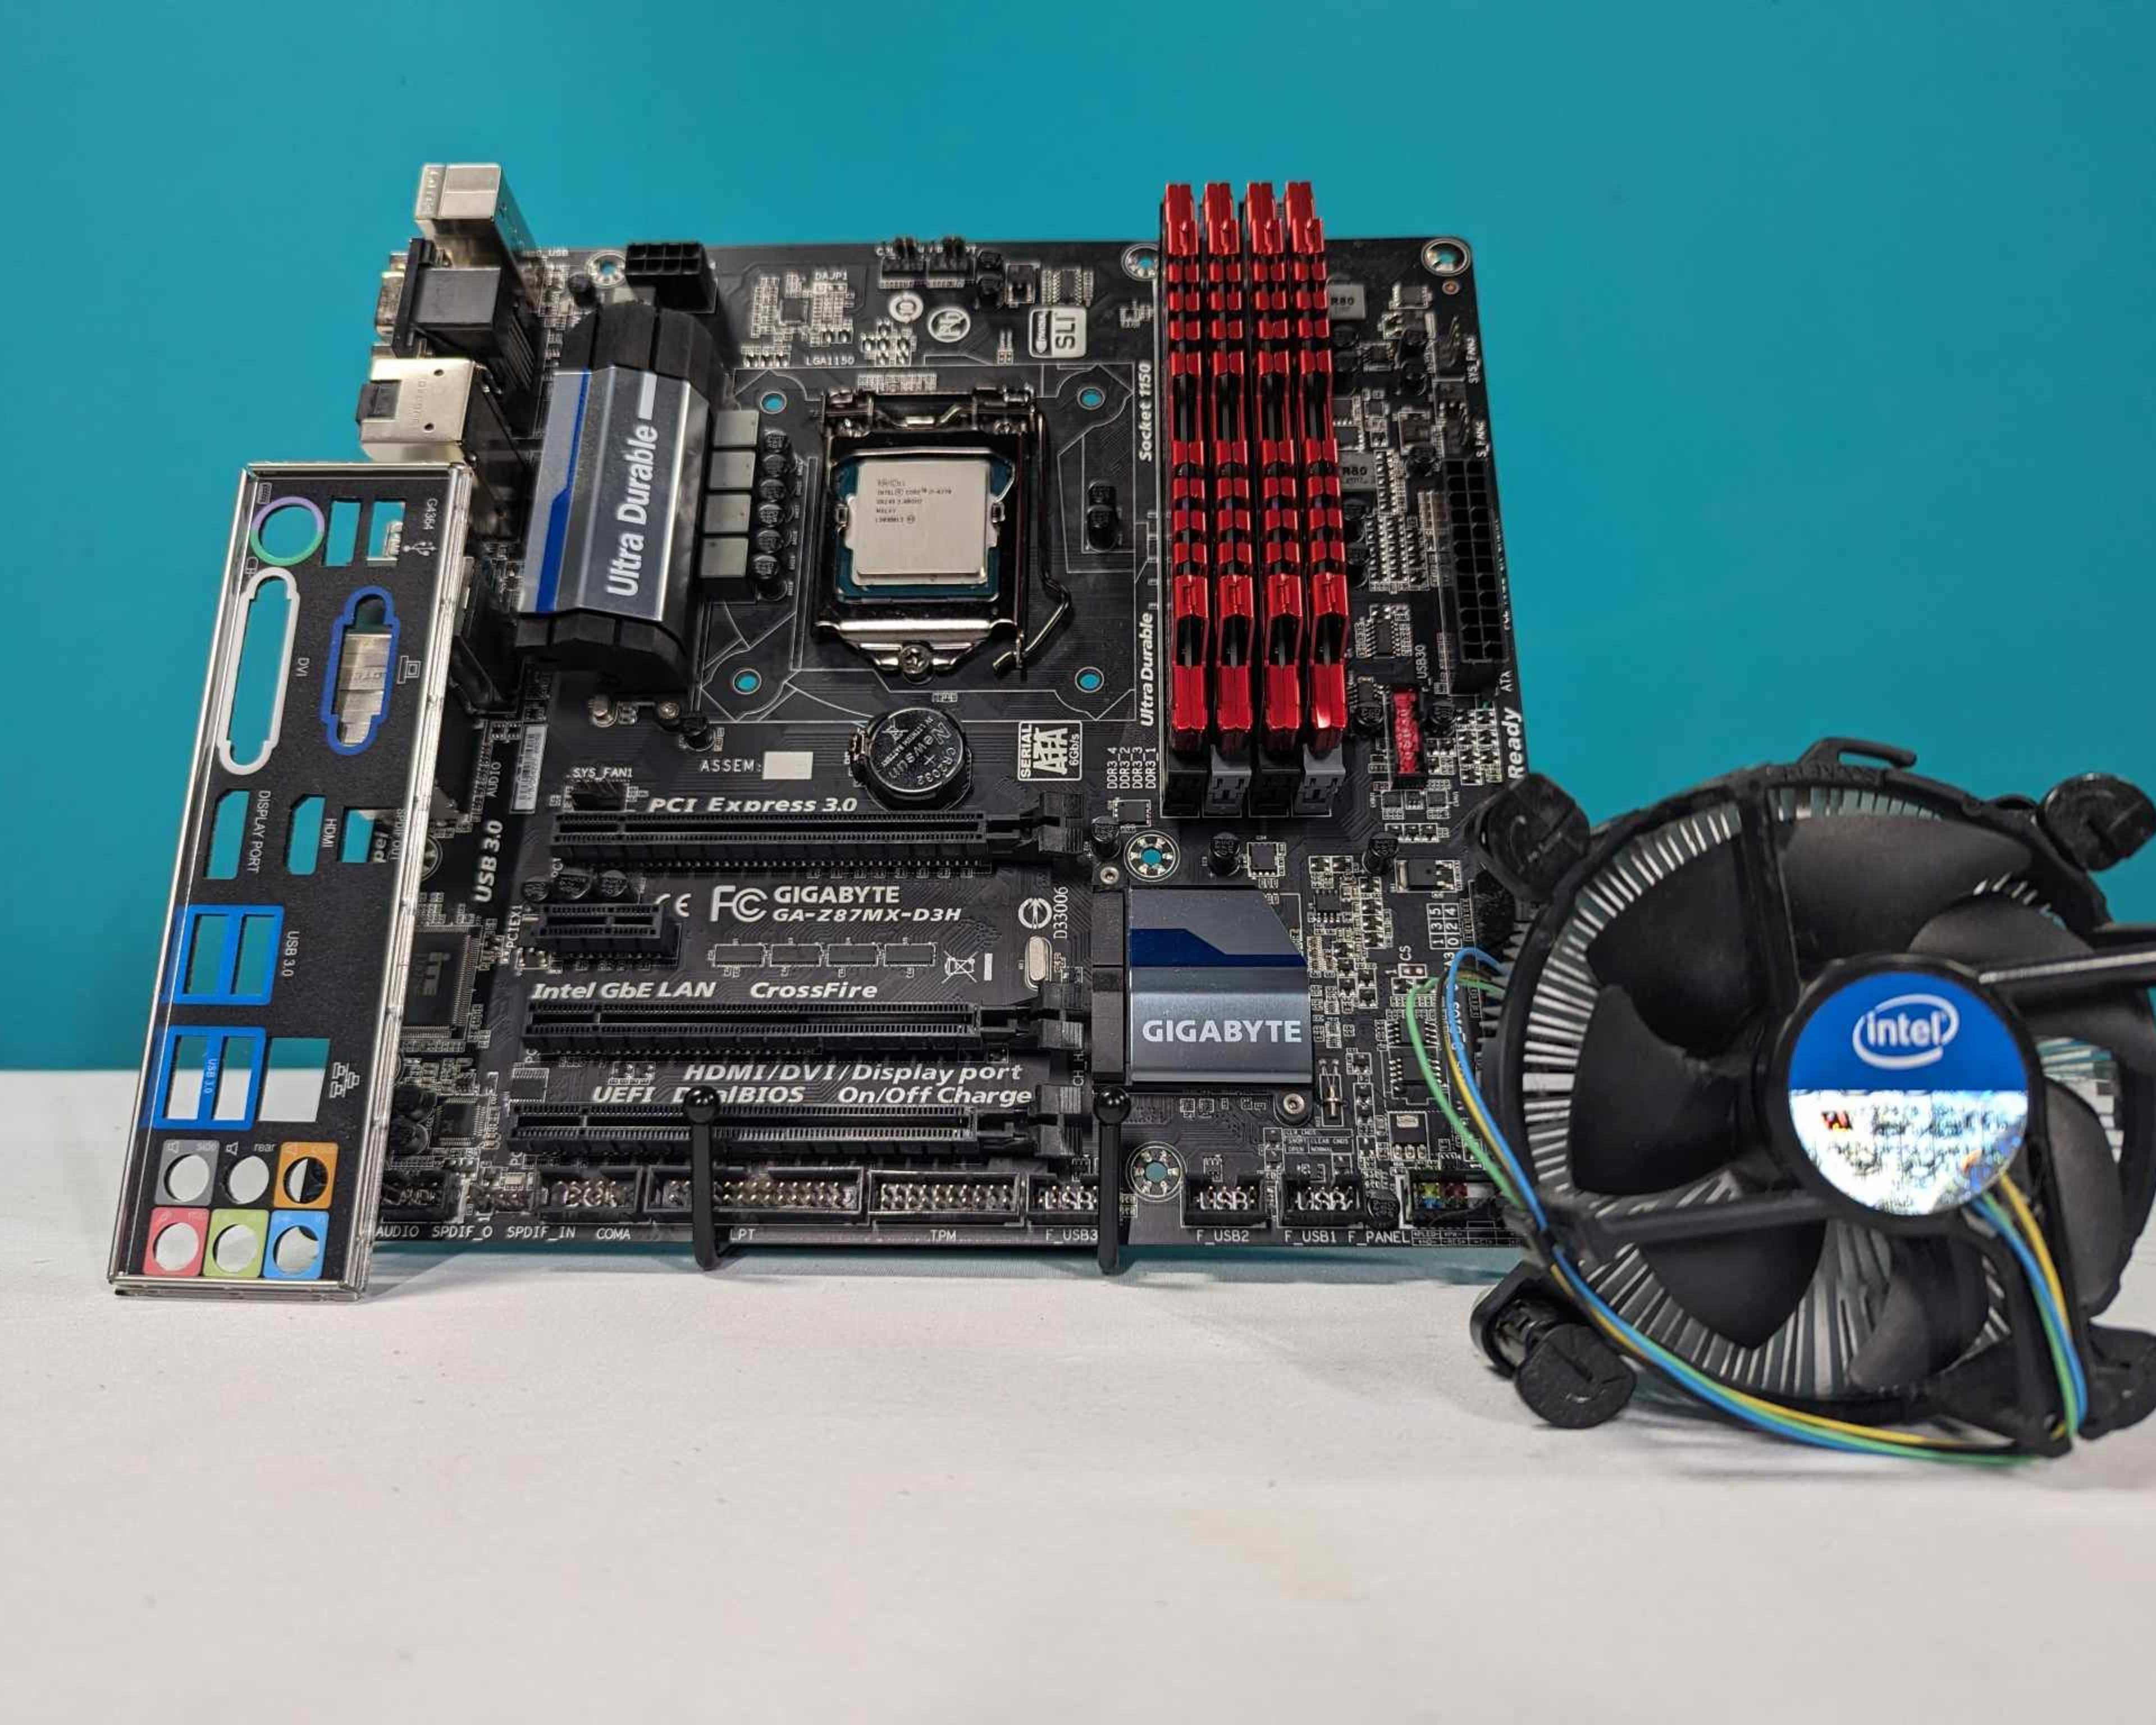 Gigabyte Z87 Motherboard Kit. Fully populated with i7-4770 and 16gb ram. Has Cooler! Free Ship!